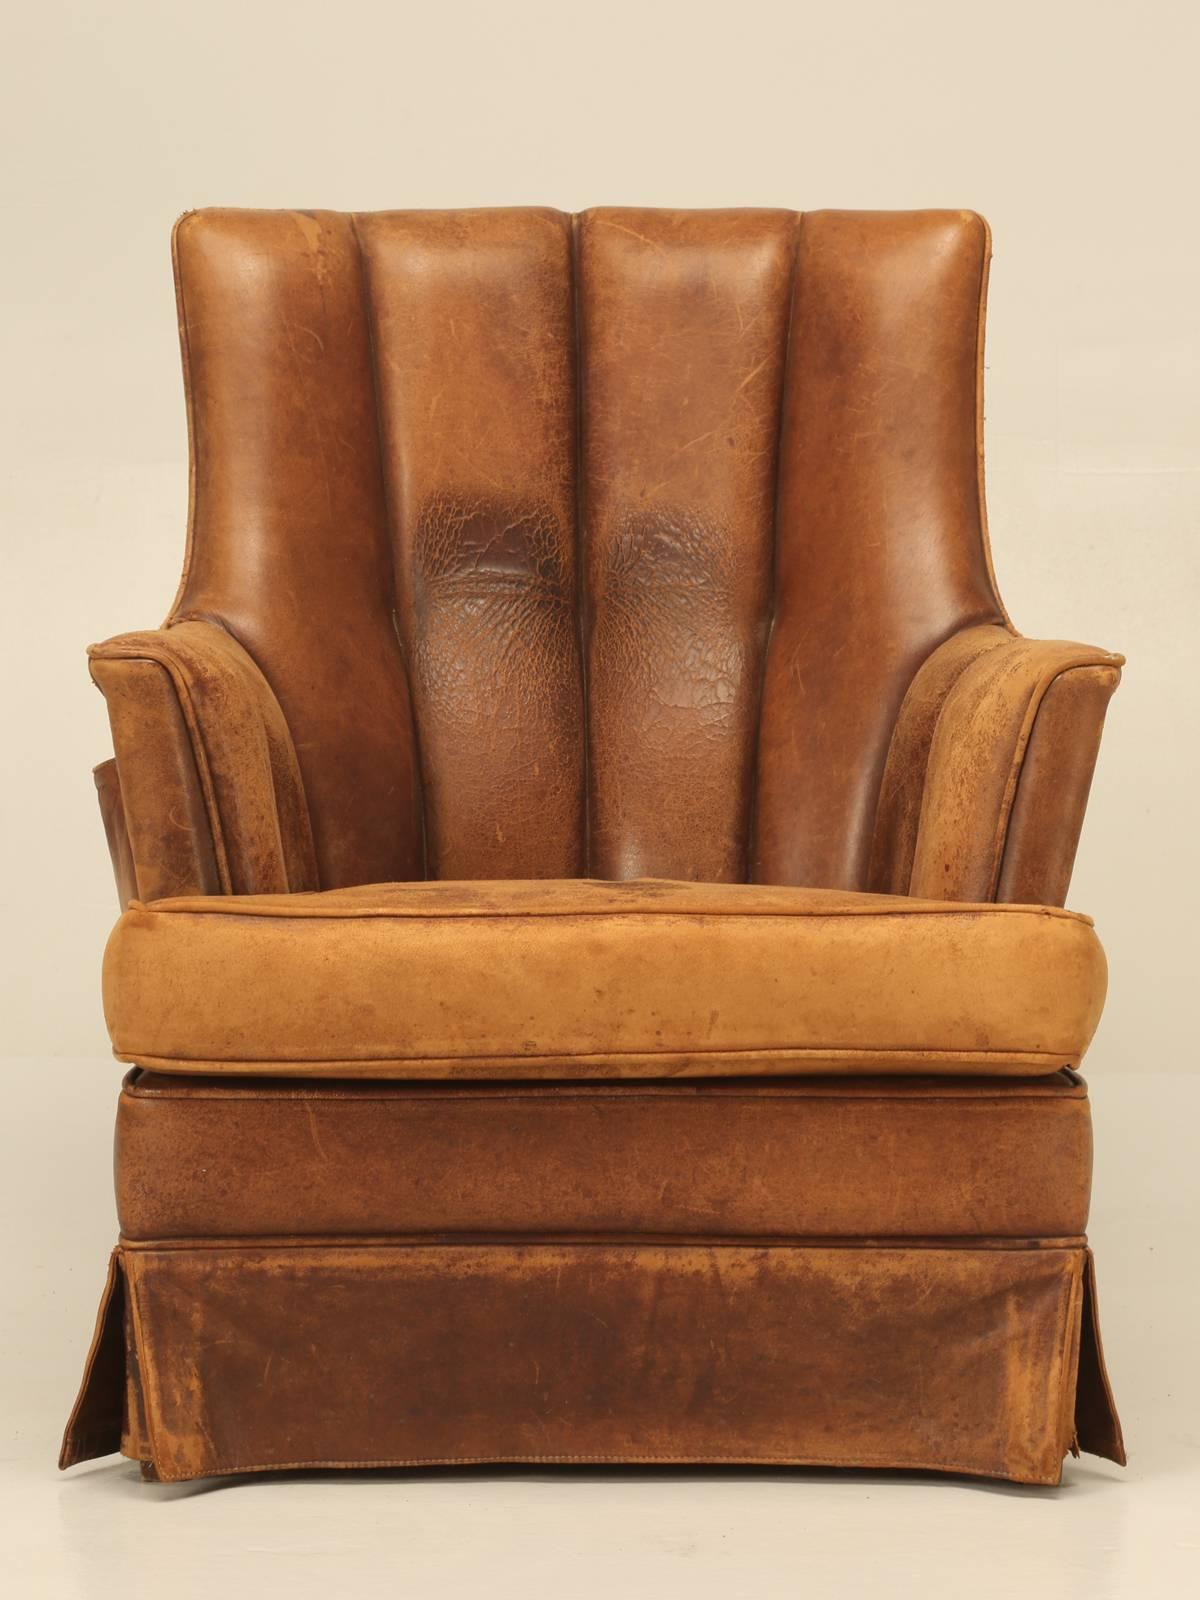 Incredible comfortable, all original (still supple) leather skirted 1940s, French club chair, with a built-in magazine pocket and I have to say, that this was a first for us. Large enough for a good size man, but not too big for a petite woman; just